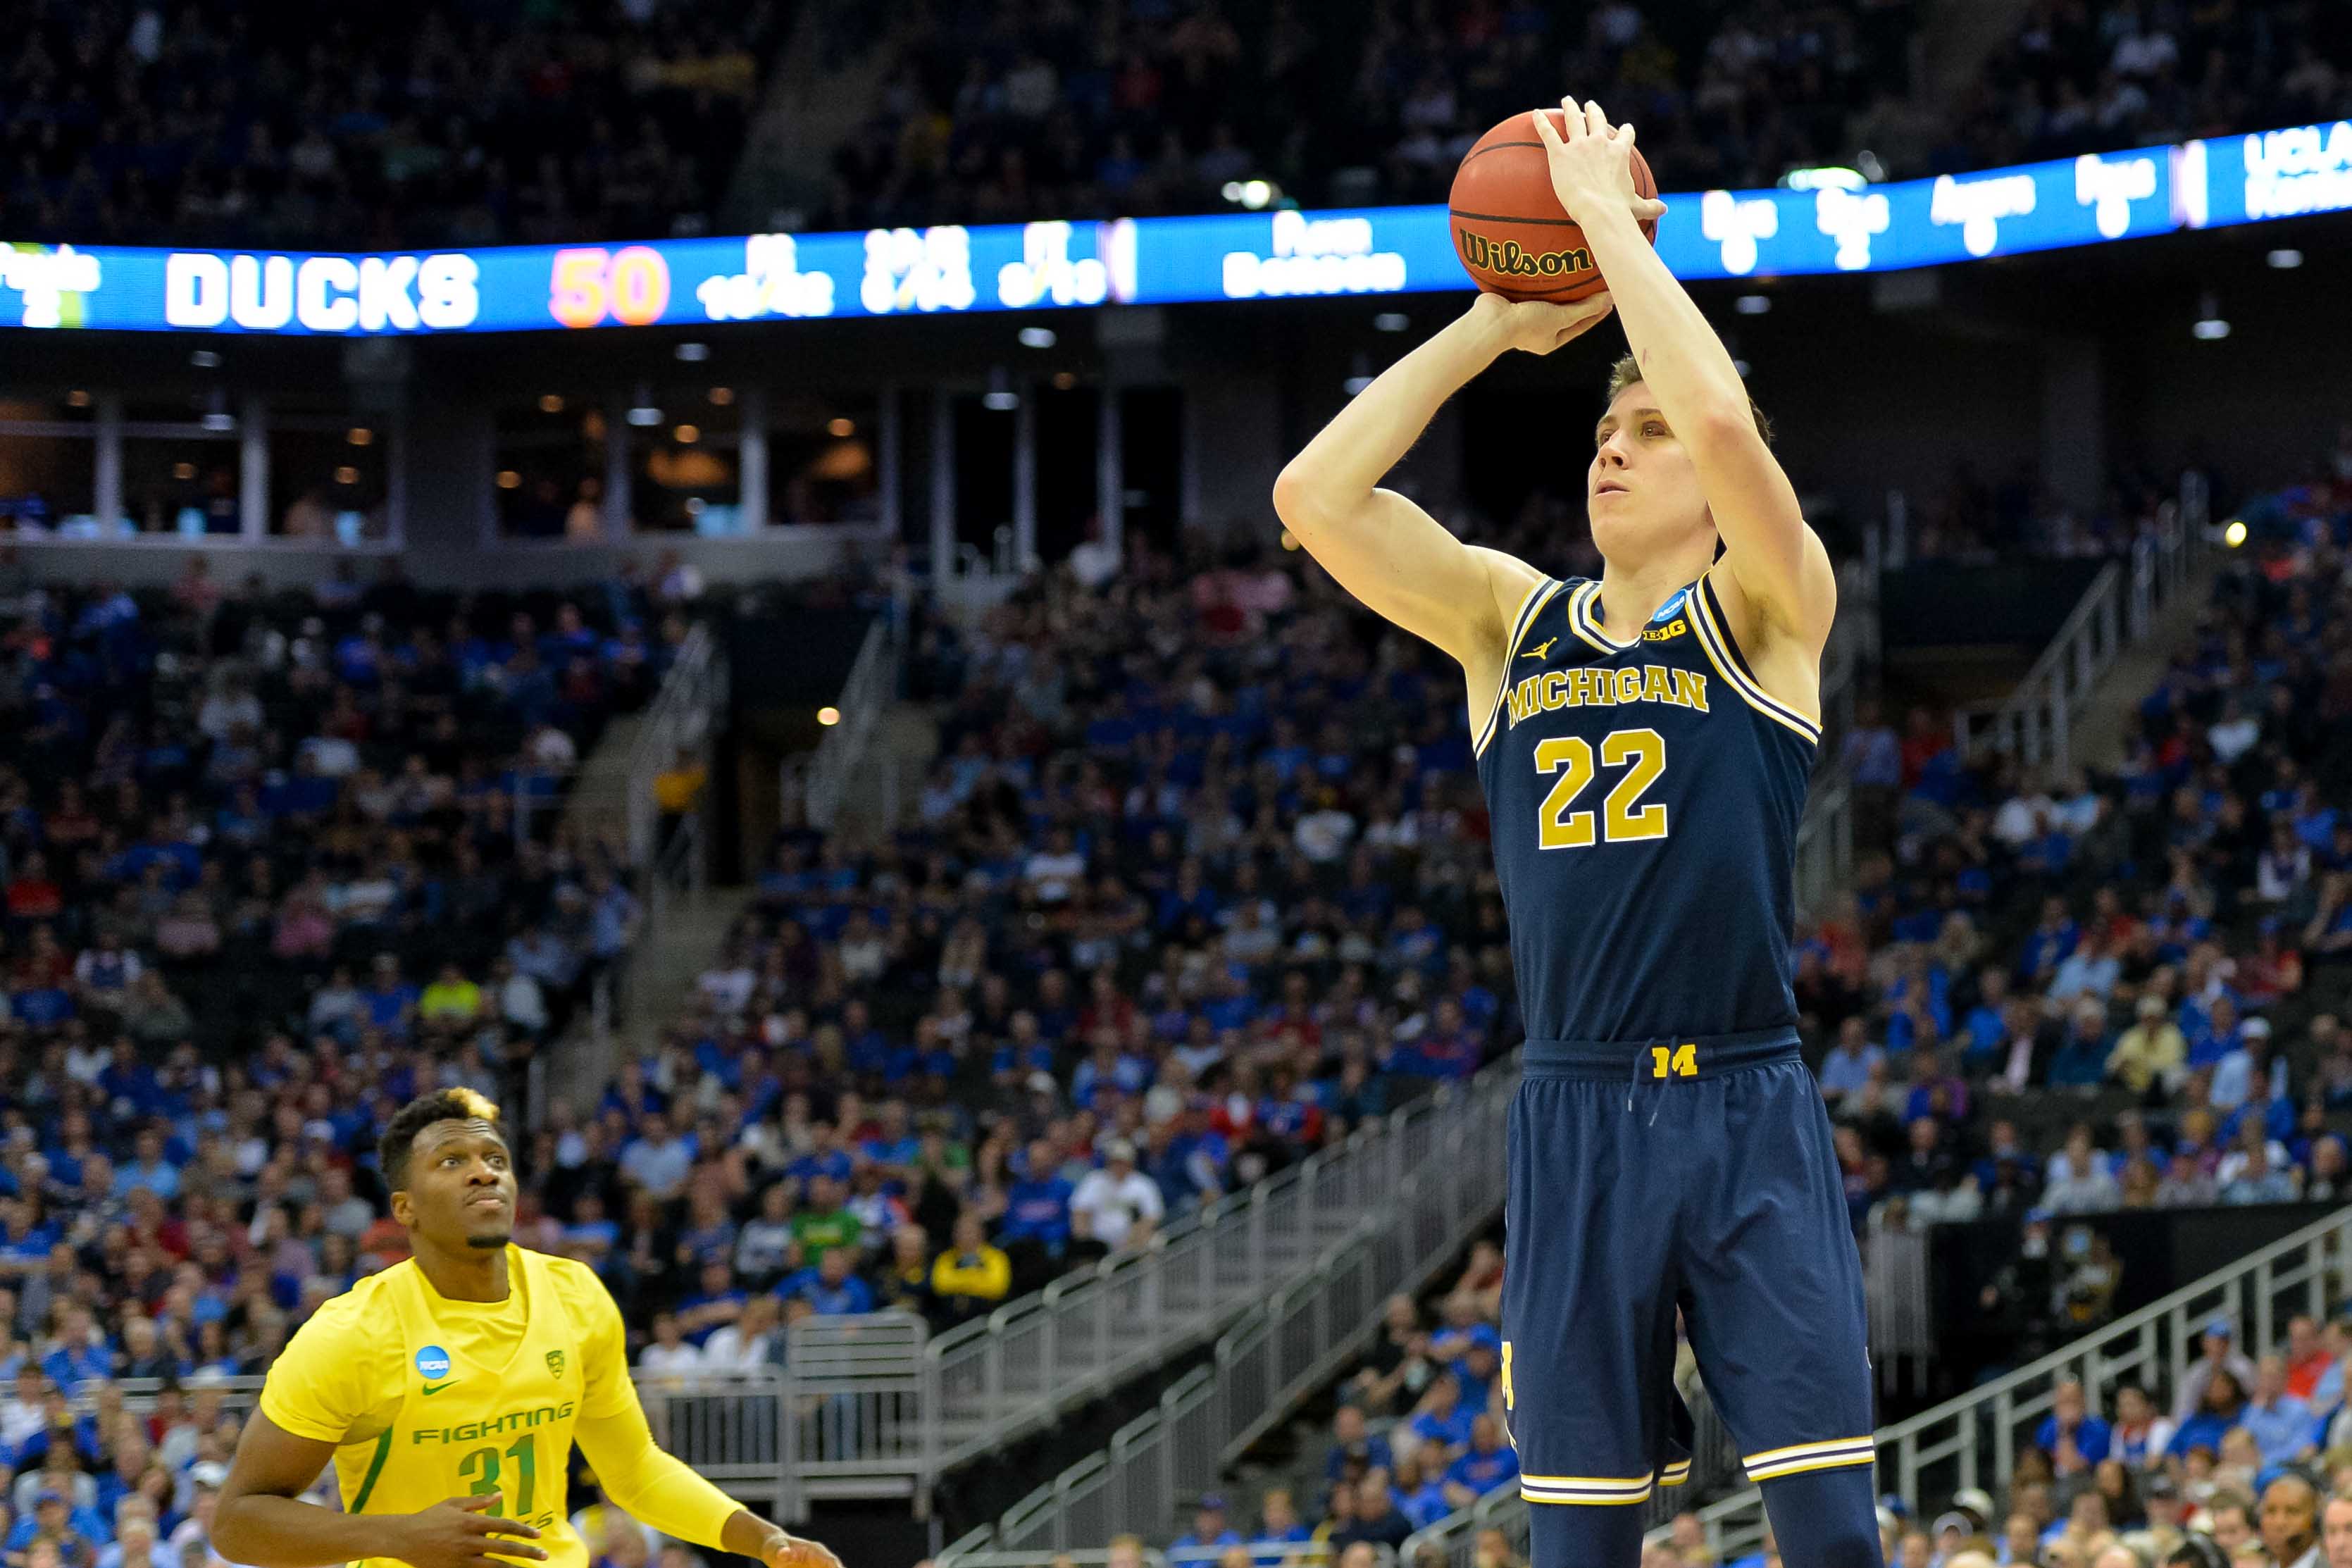 Michigan Basketball: How the Wolverines go about replacing D.J. Wilson